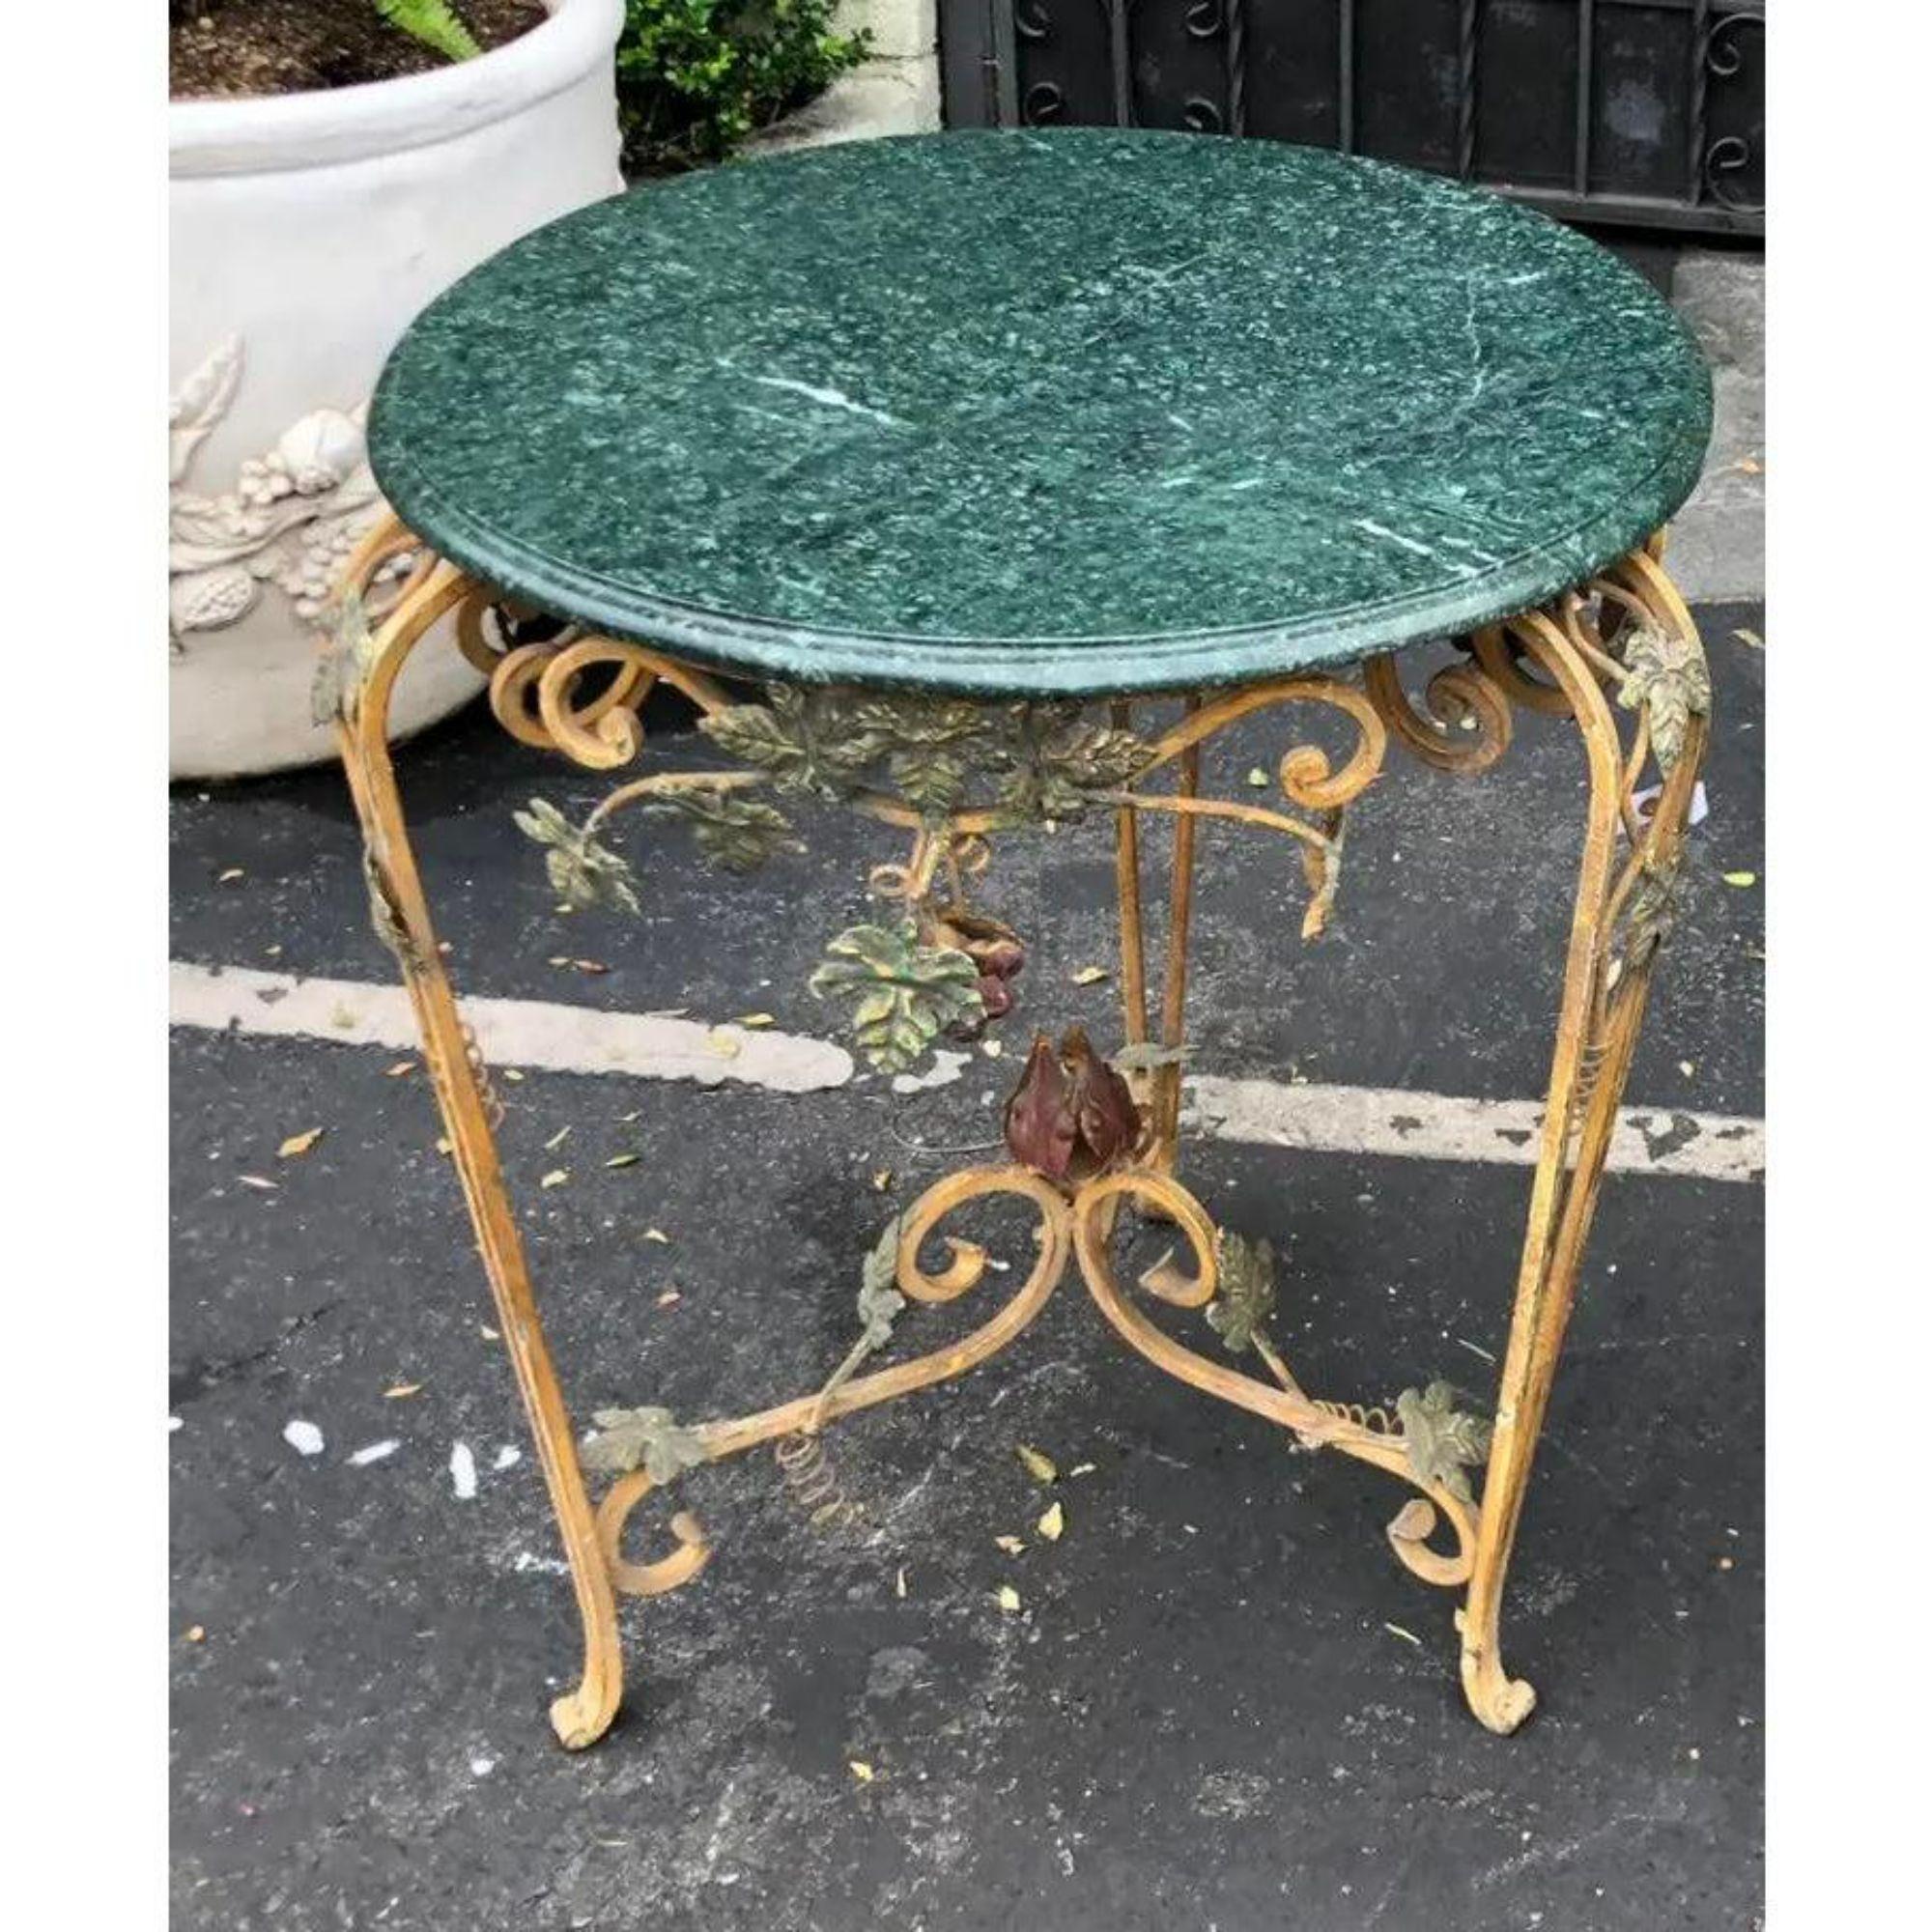 Venetian Style Charles Pollock for William Switzer tole iron & marble table
Priced each!

Additional information: 
Materials: Iron, Marble, Tole
Color: Green
Brand: William Switzer
Designer: Charles Pollock
Period: Late 20th Century
Styles: